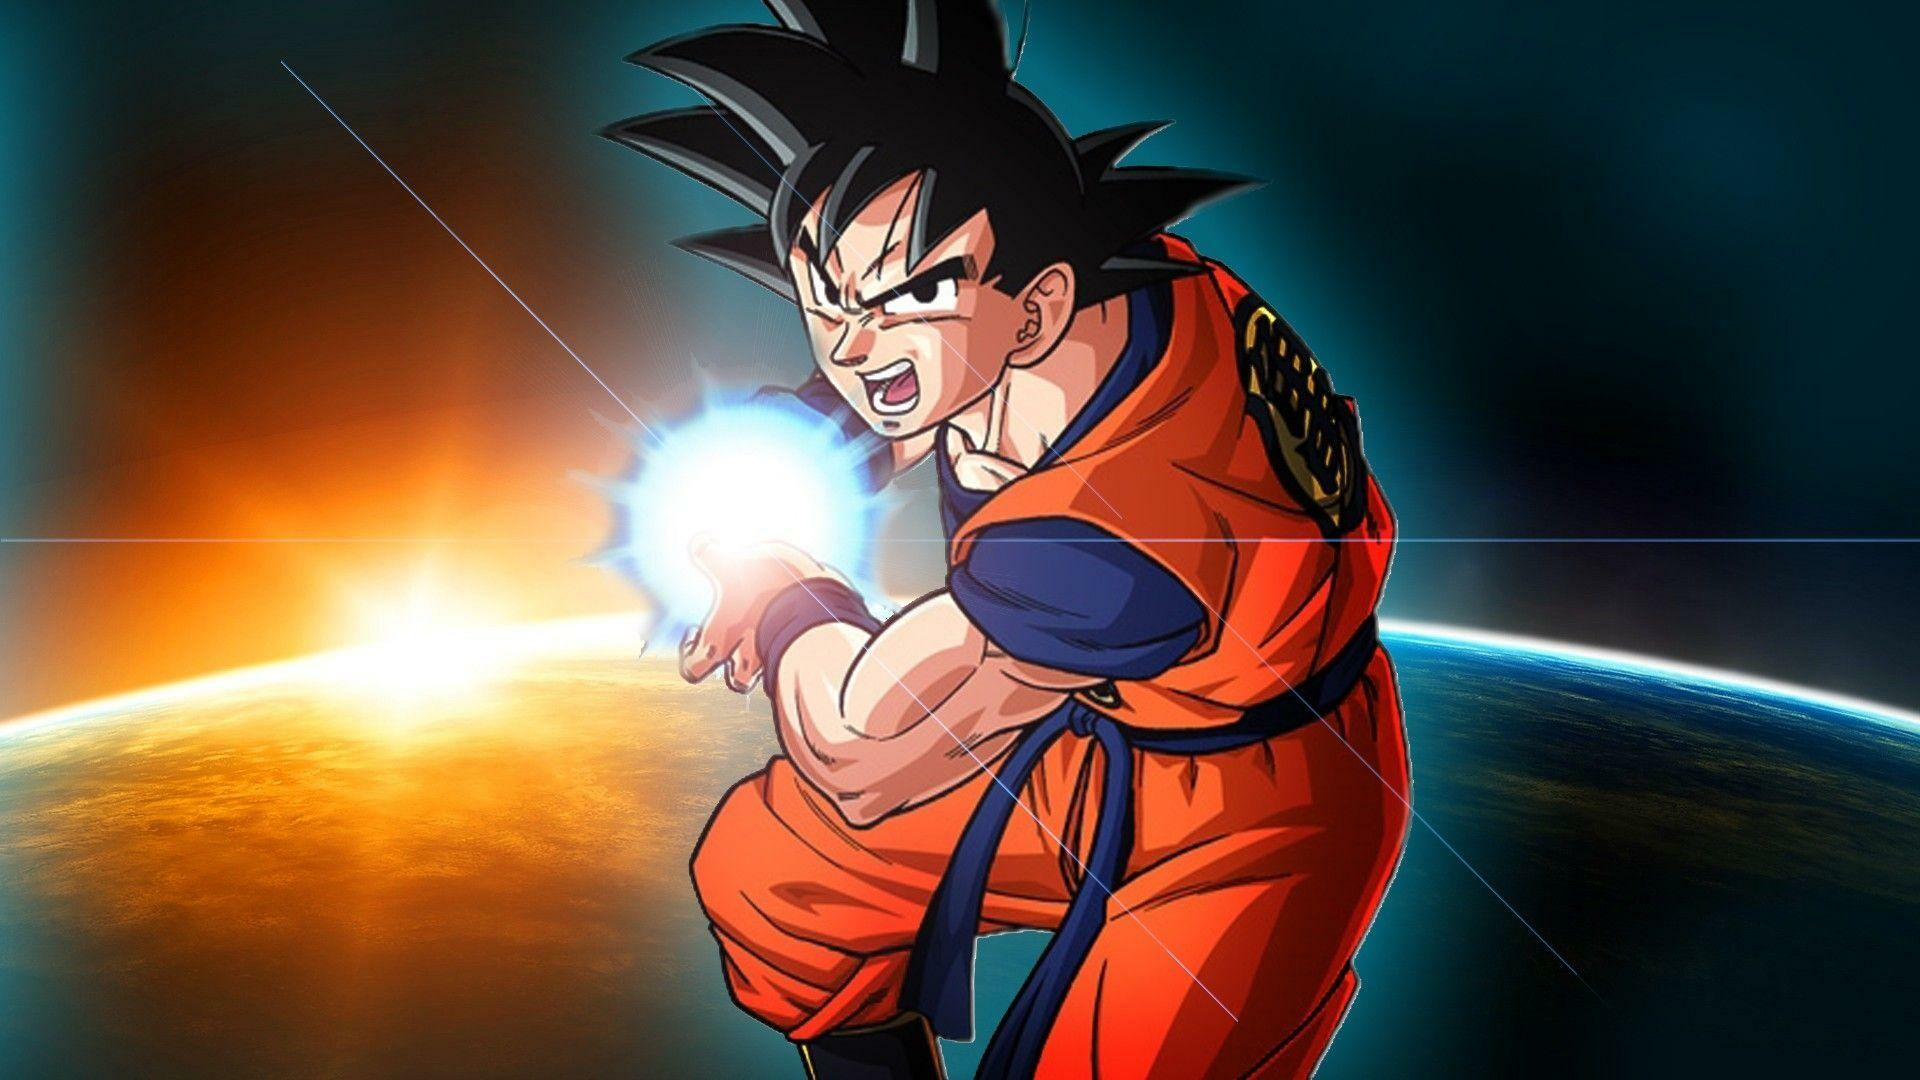 56+ Dragon Ball Goku Wallpapers: HD, 4K, 5K for PC and Mobile | Download  free images for iPhone, Android